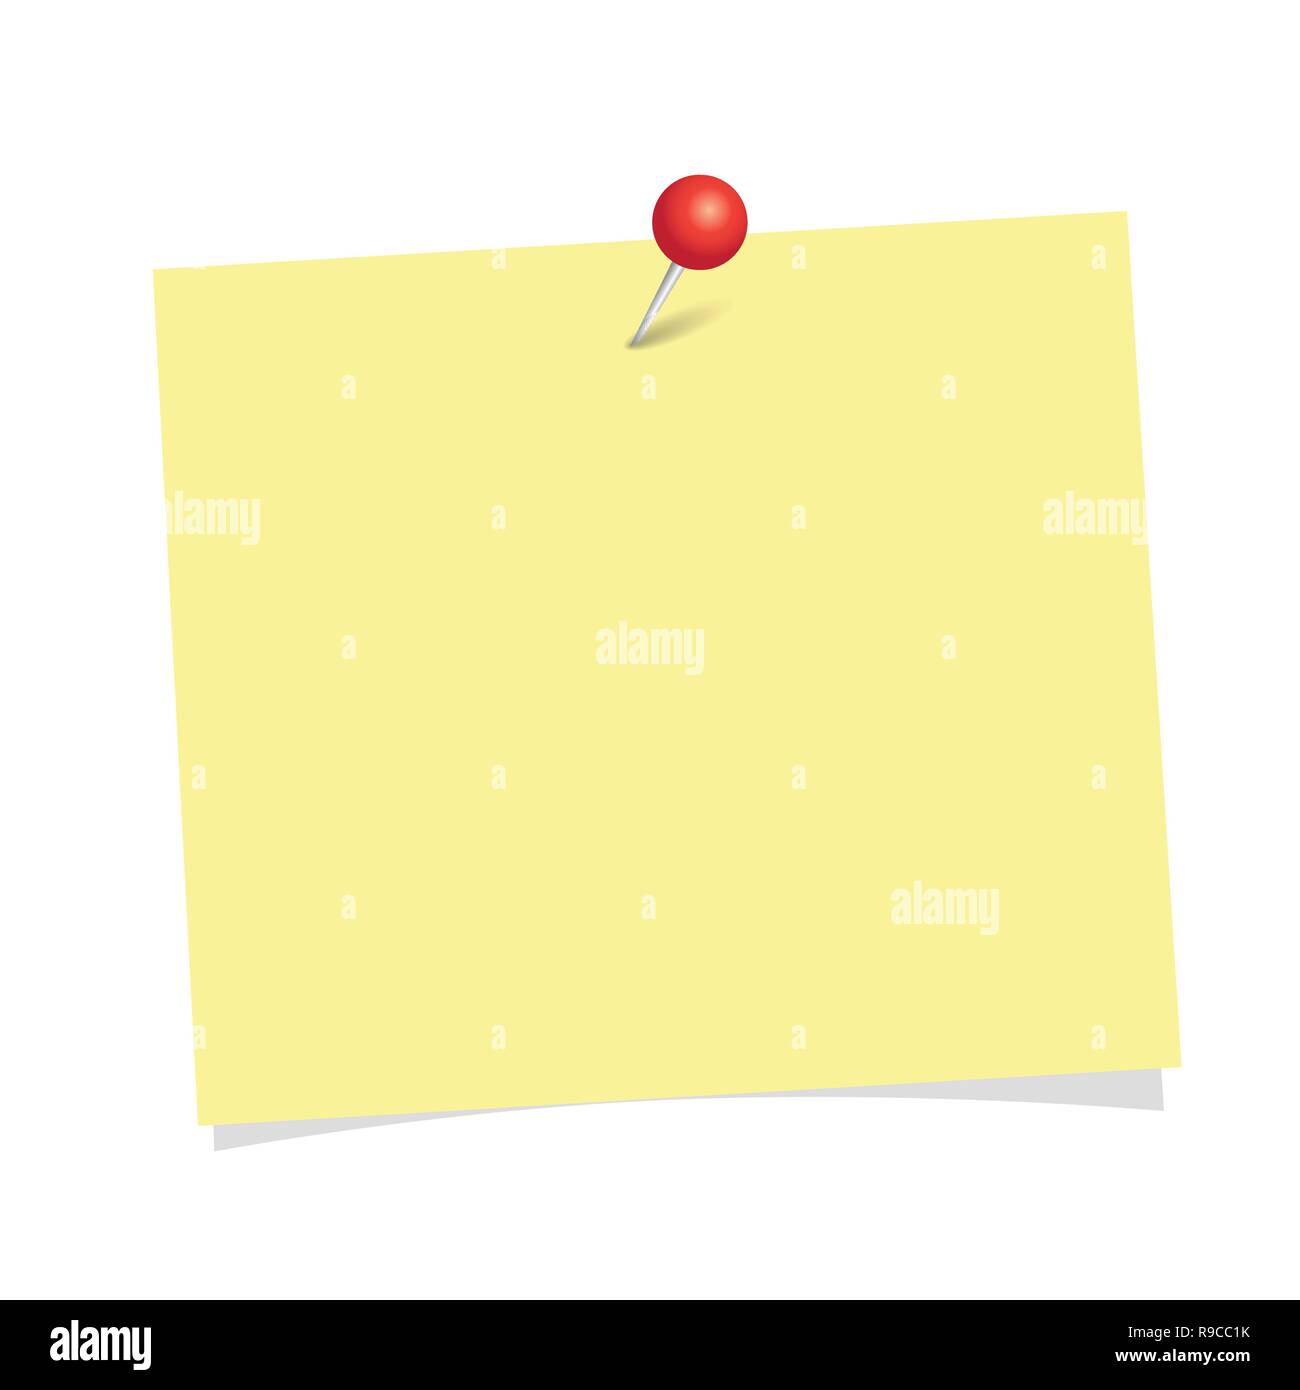 Yellow Note Paper With Red Pin Isolated On A White Background Vector